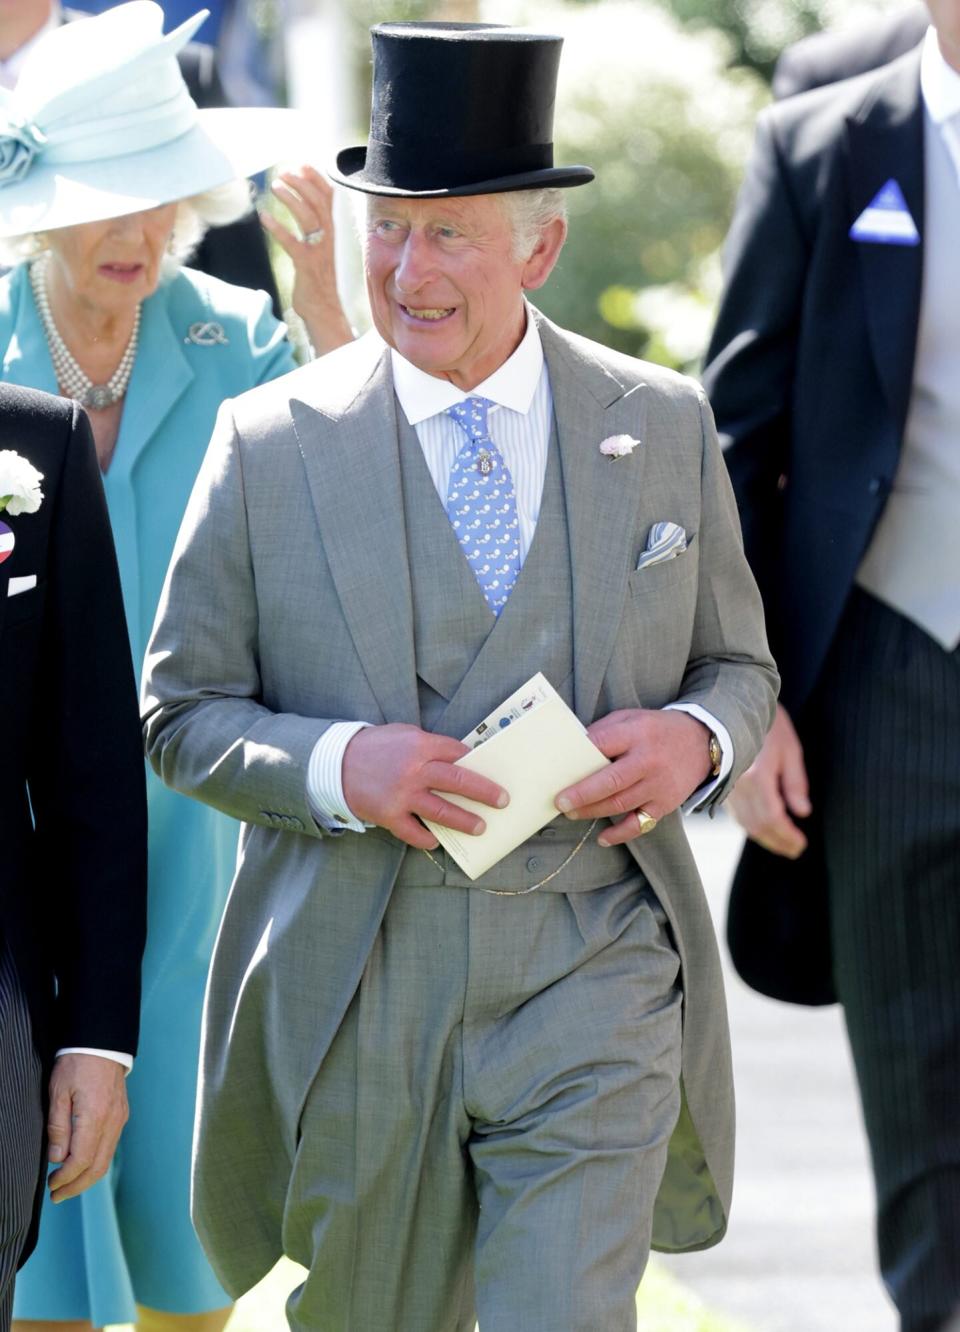 Prince Charles, Prince of Wales smiles as he attends Royal Ascot 2022